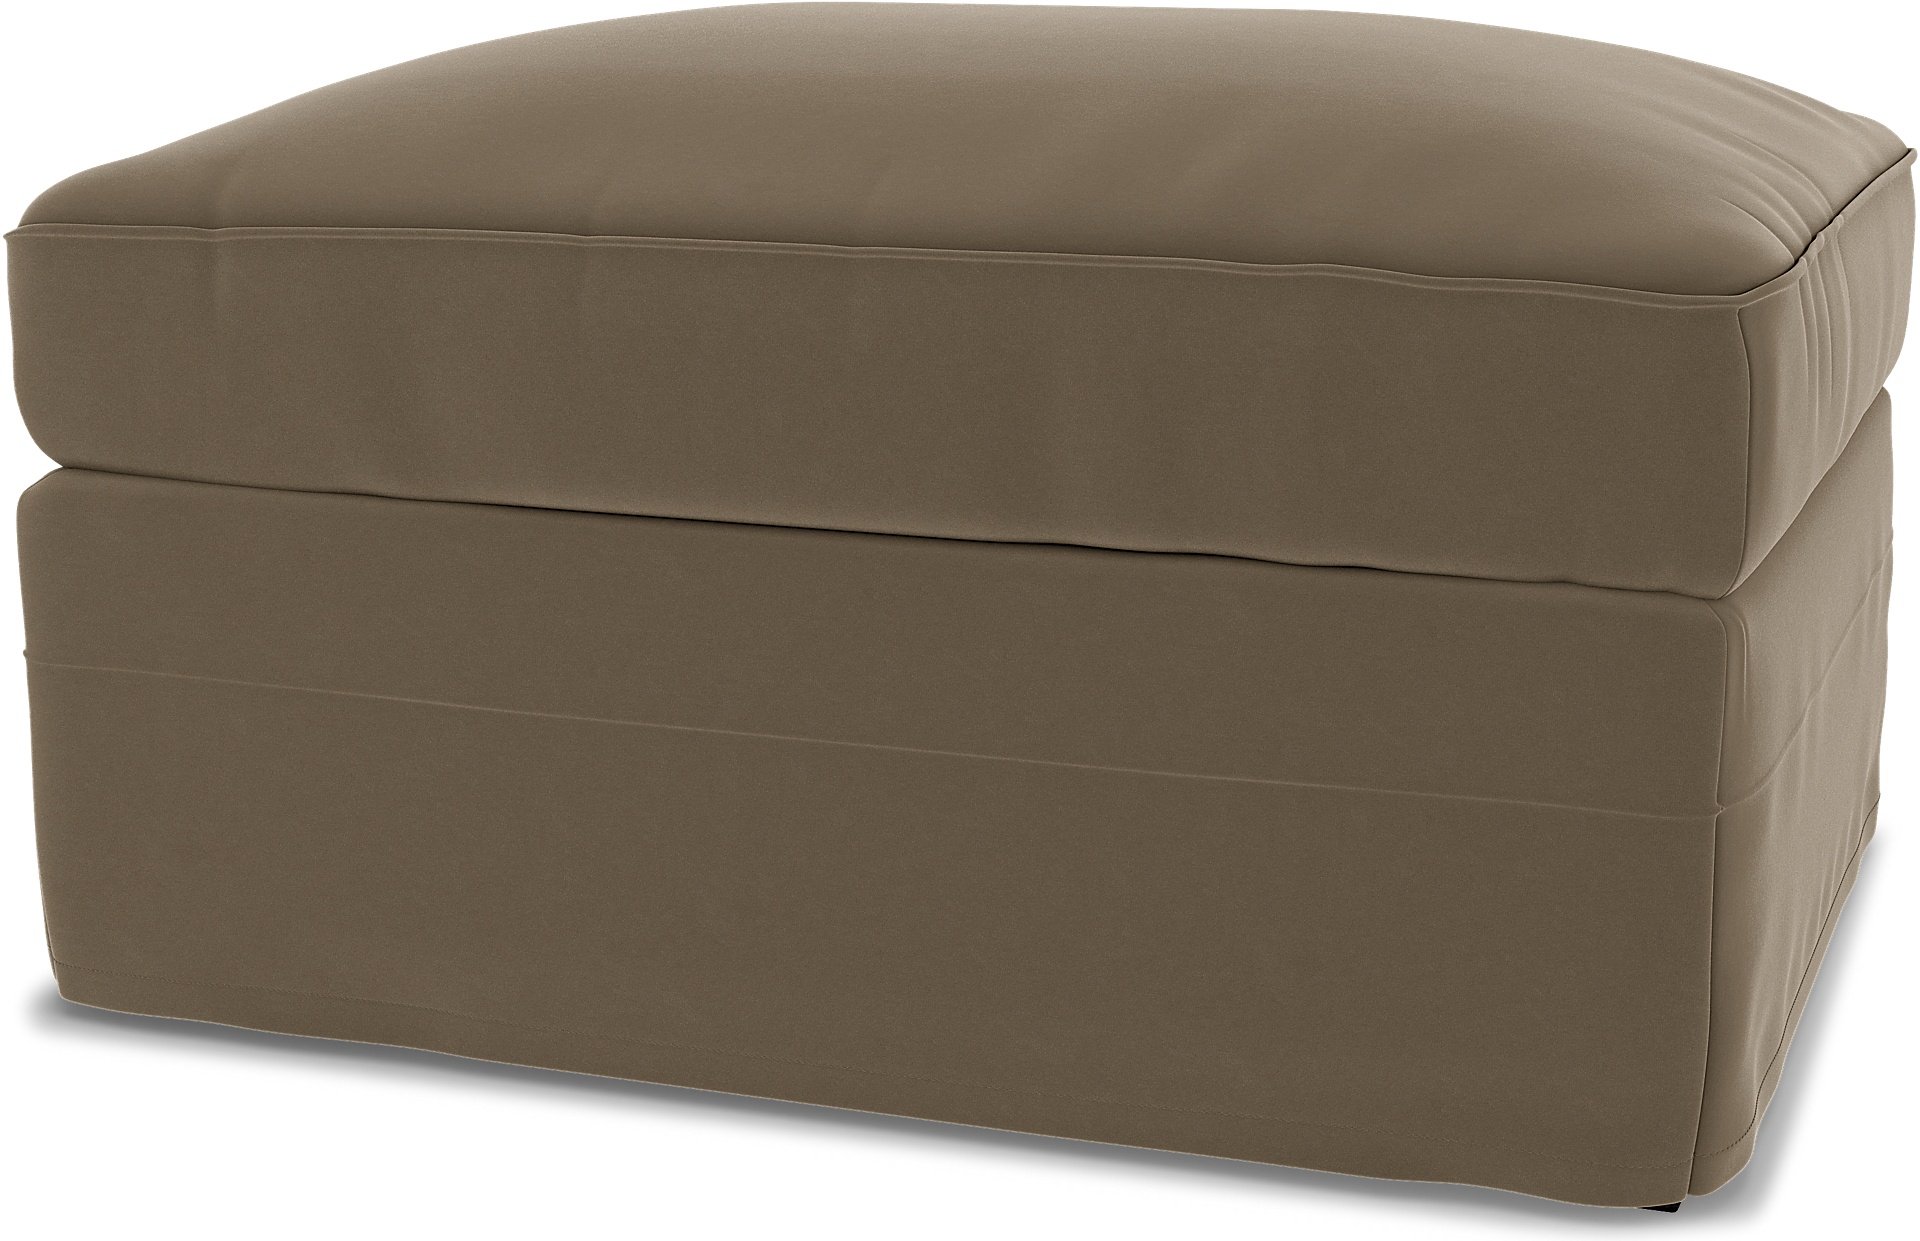 IKEA - Gronlid Footstool with Storage Cover, Taupe, Velvet - Bemz